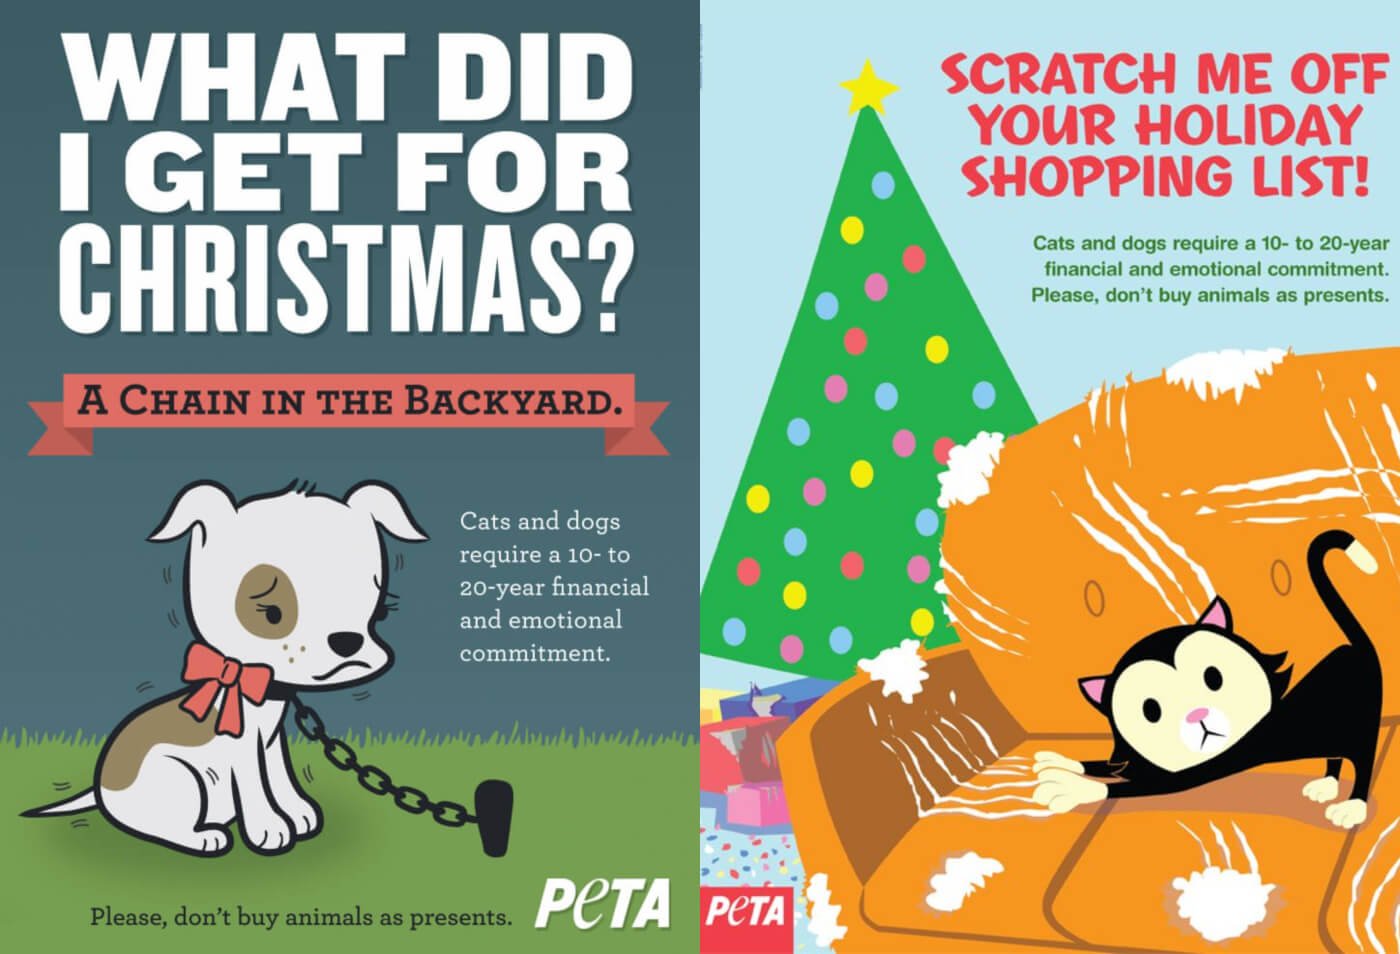 Do Pets Make Good Gifts? The Right Way to Gift a Dog or Cat